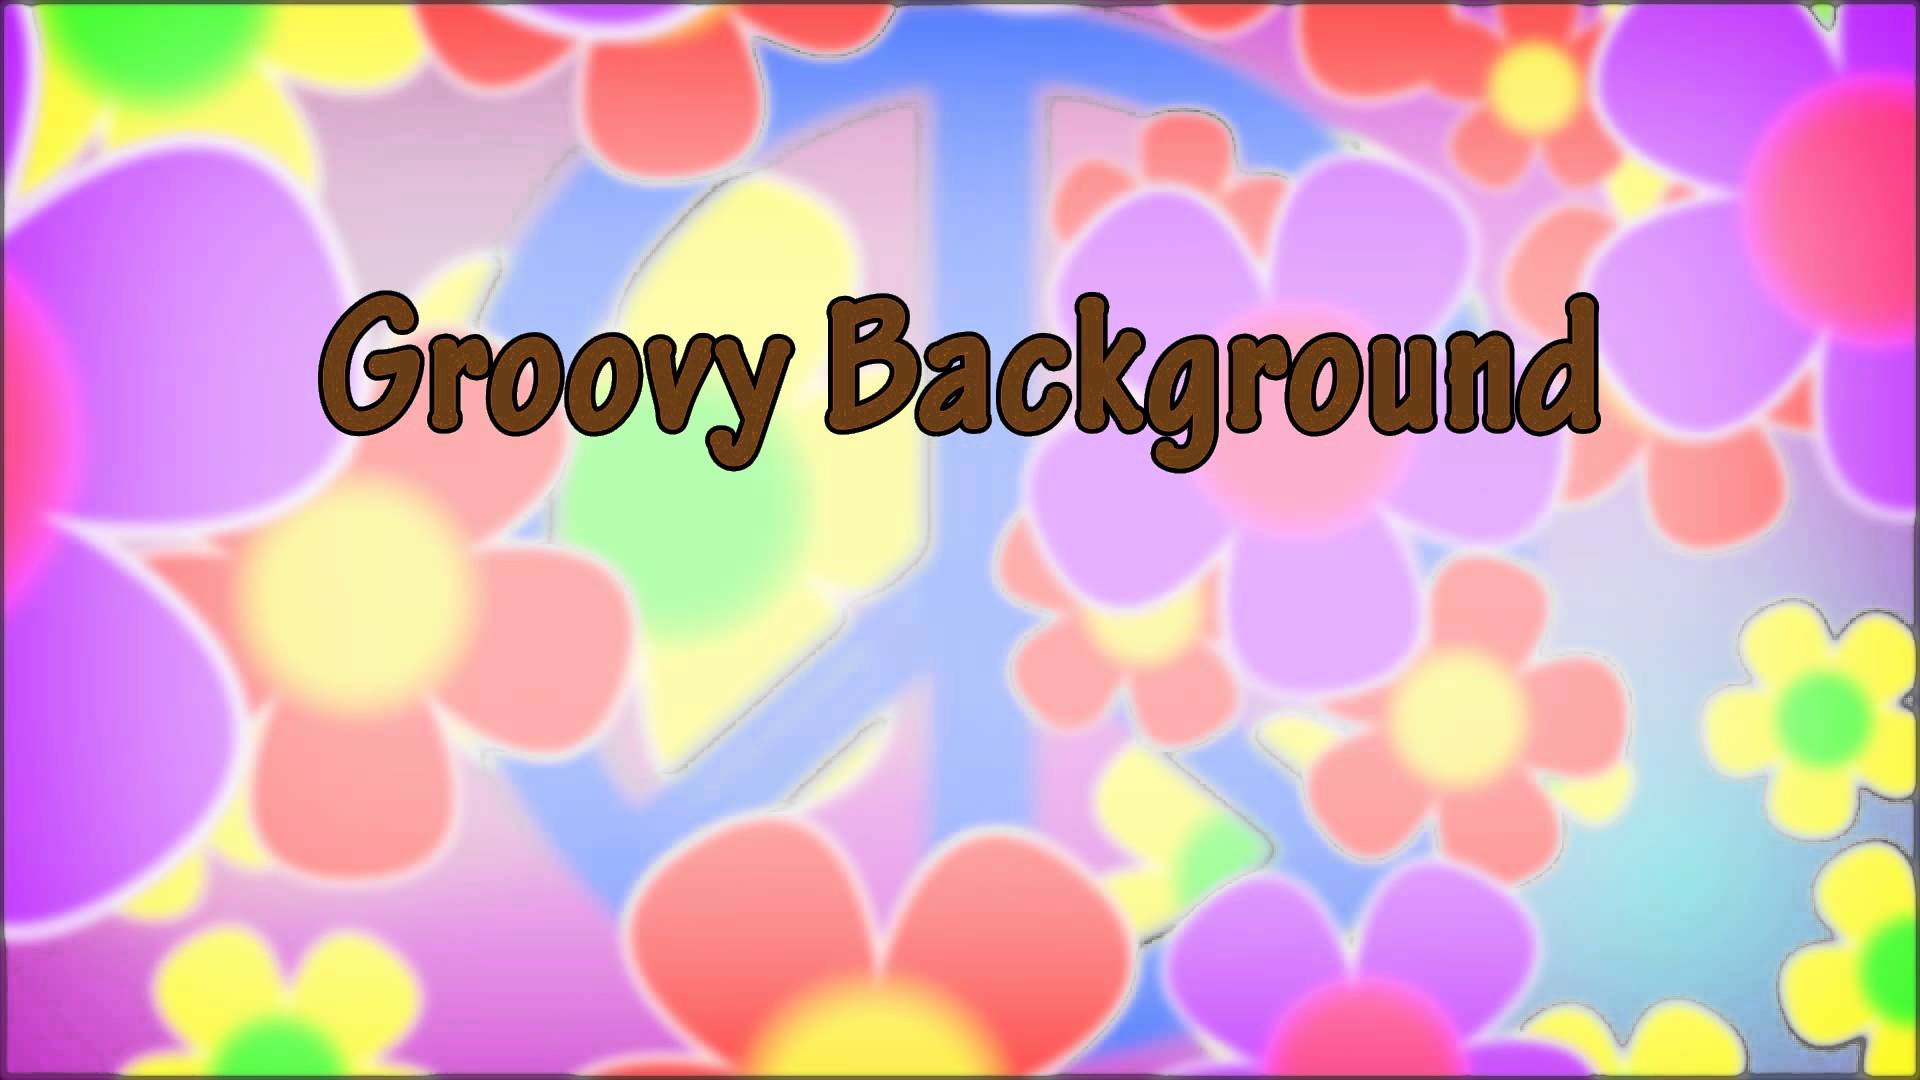 Groovy Background images